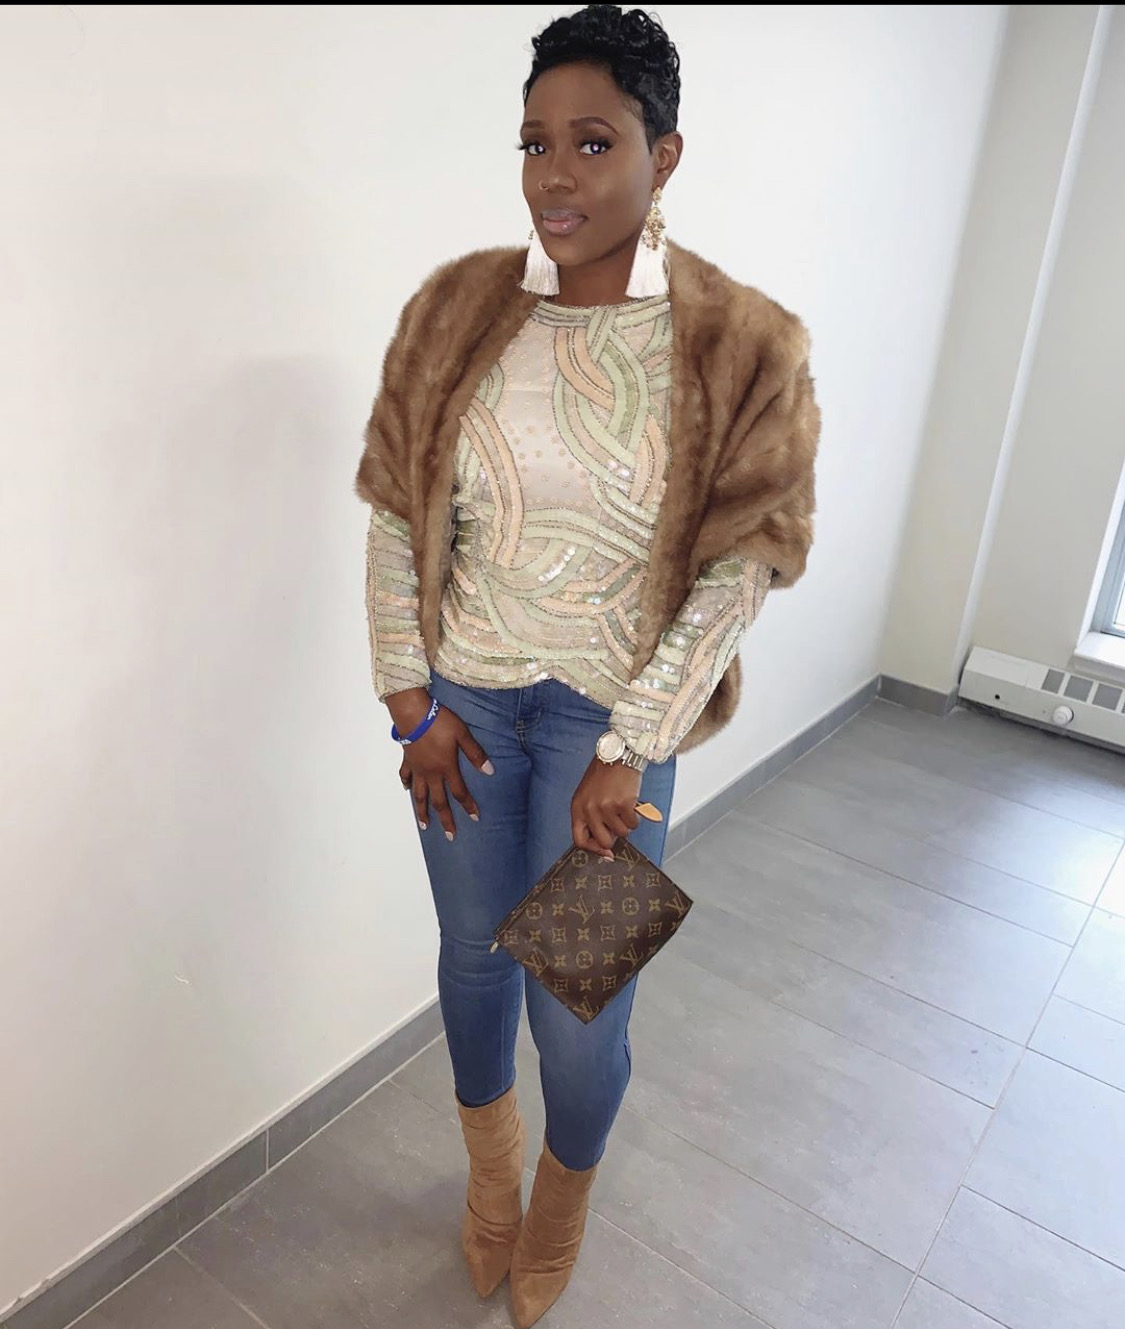 Fashion Bombshell of the Day: Kaysha from New York